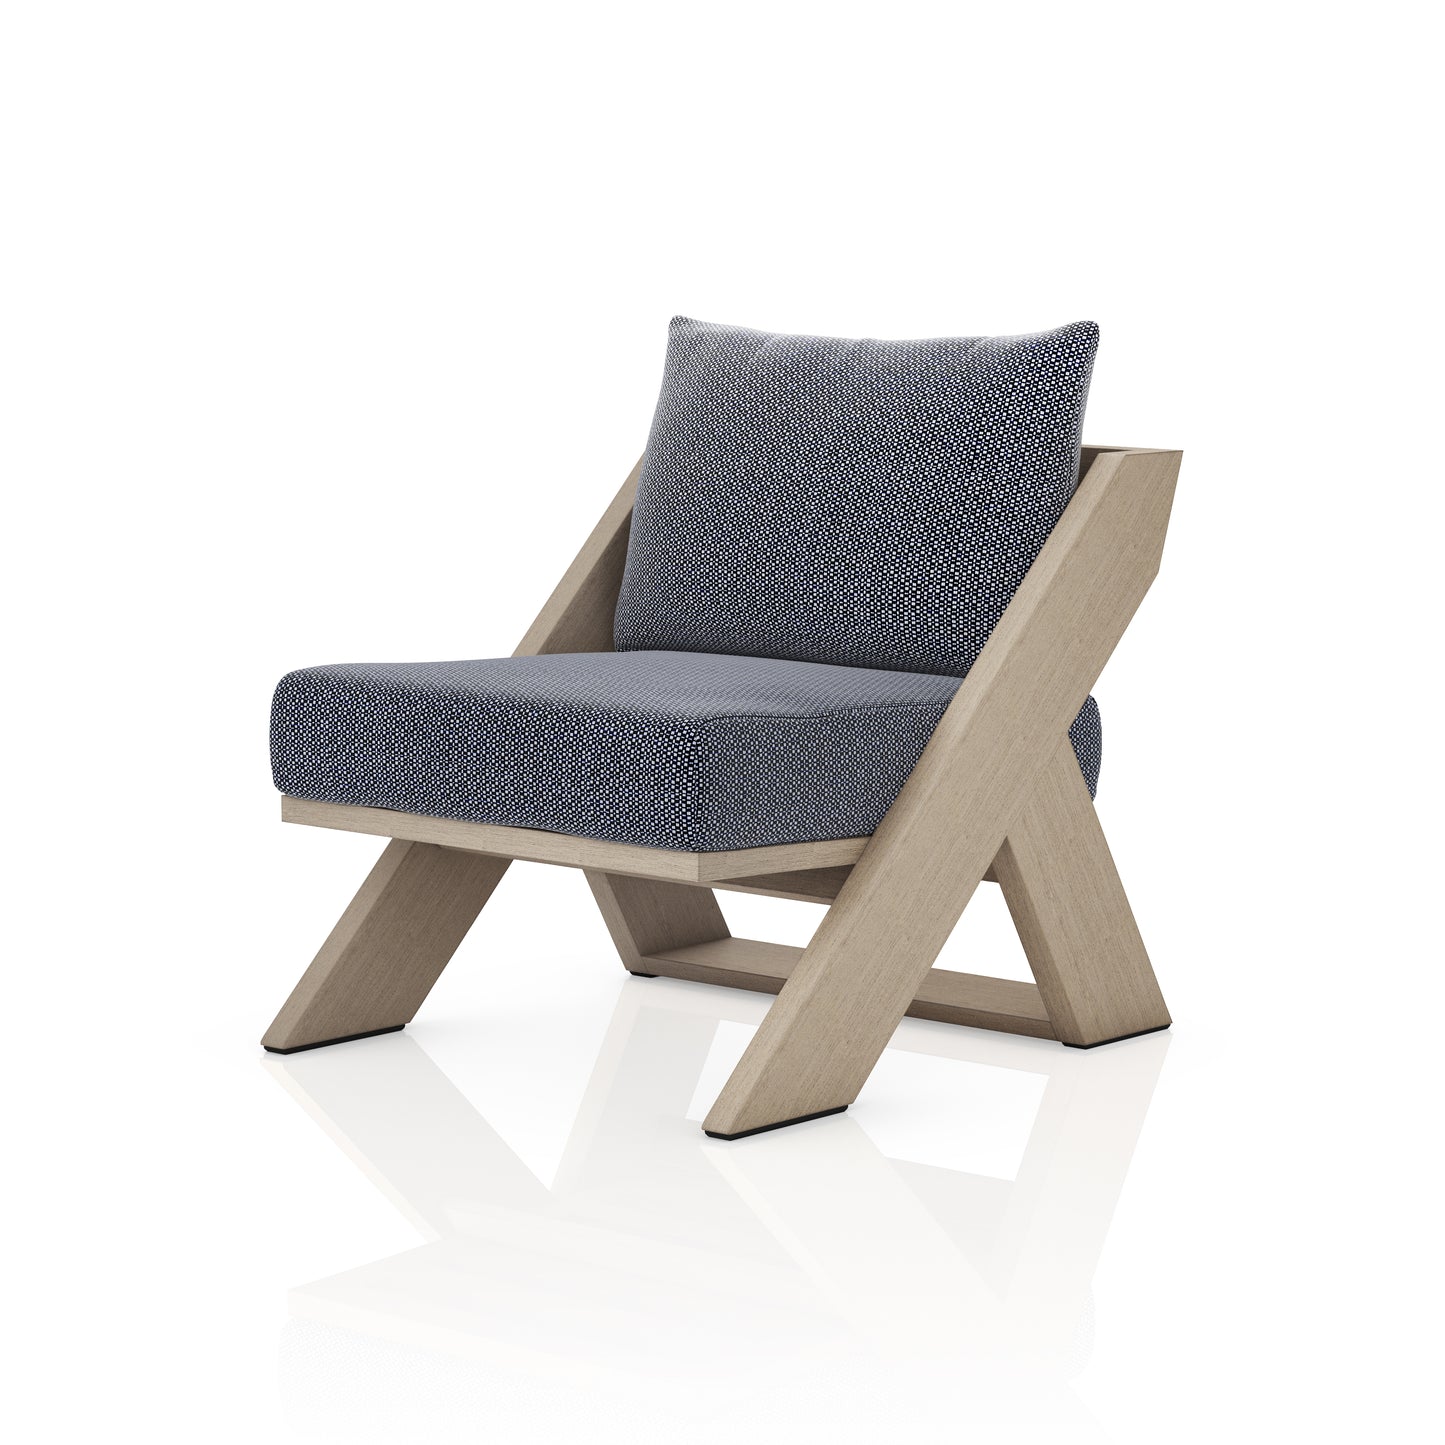 Load image into Gallery viewer, Hagen Outdoor Chair Faye Navy / Washed BrownOutdoor Chair Four Hands  Faye Navy Washed Brown  Four Hands, Mid Century Modern Furniture, Old Bones Furniture Company, Old Bones Co, Modern Mid Century, Designer Furniture, https://www.oldbonesco.com/
